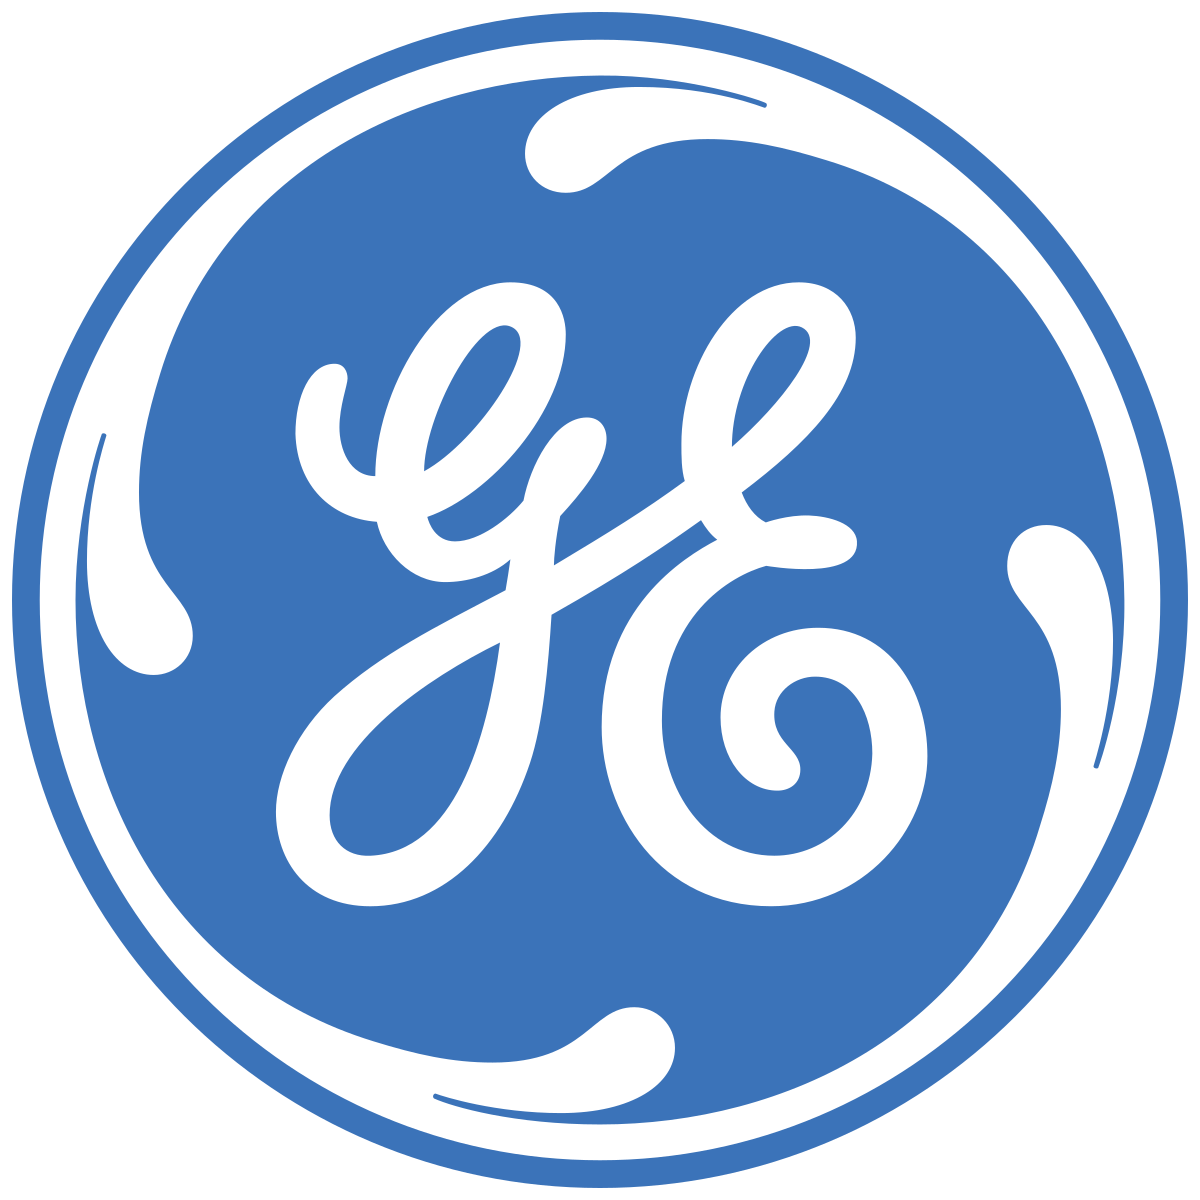 In 1977, General Electric was one of America’s largest corporations. 